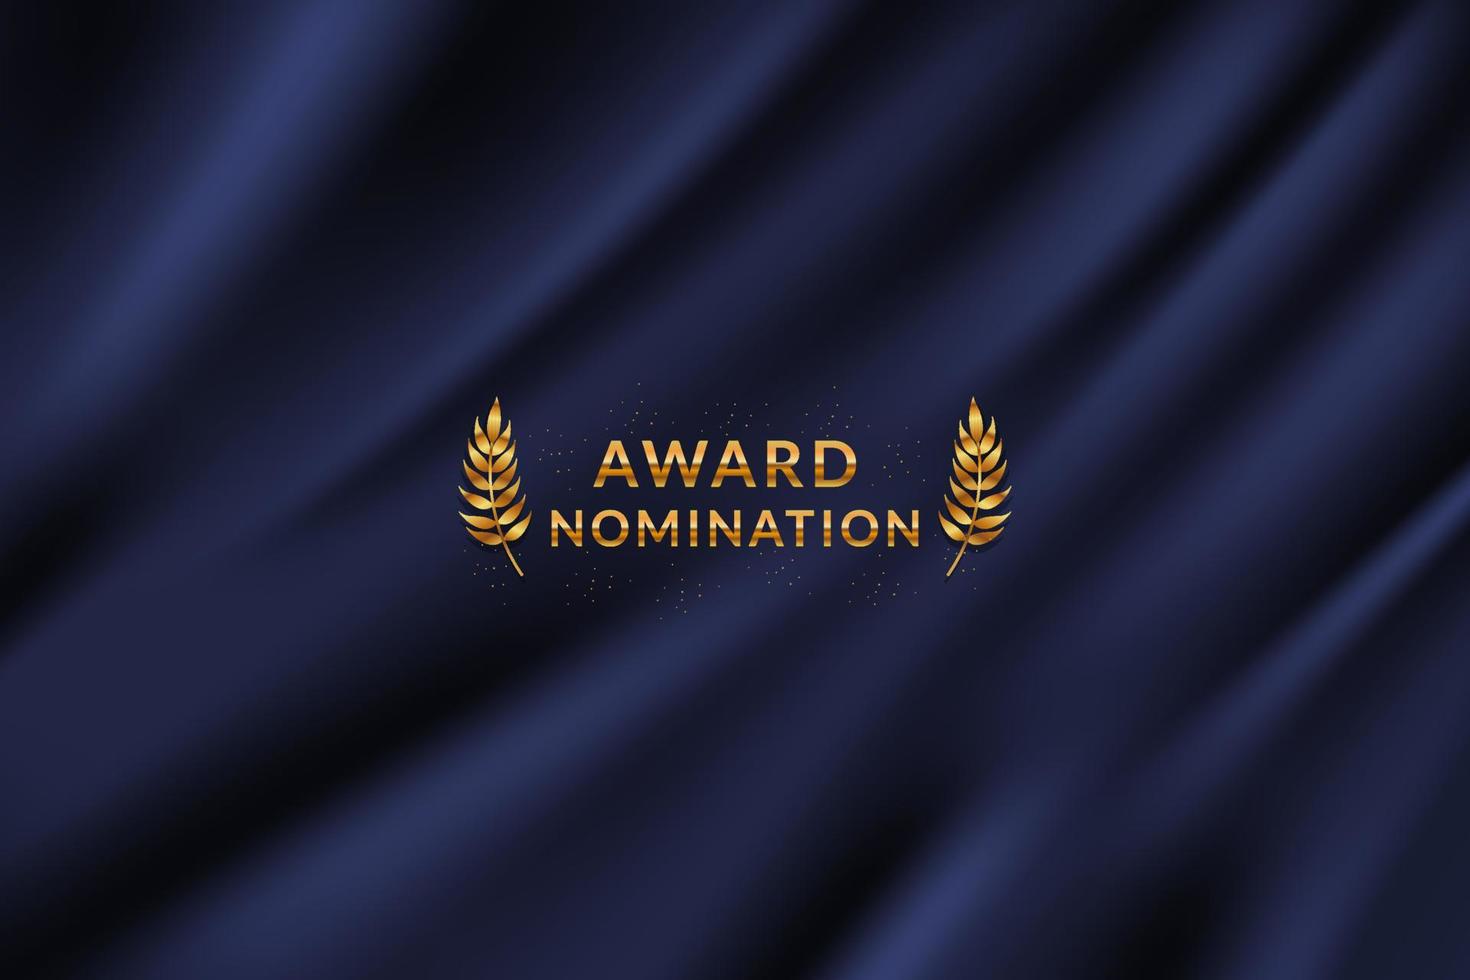 Award nomination ceremony luxury background with dark blue curtain cloth drape with golden wreath leaves vector